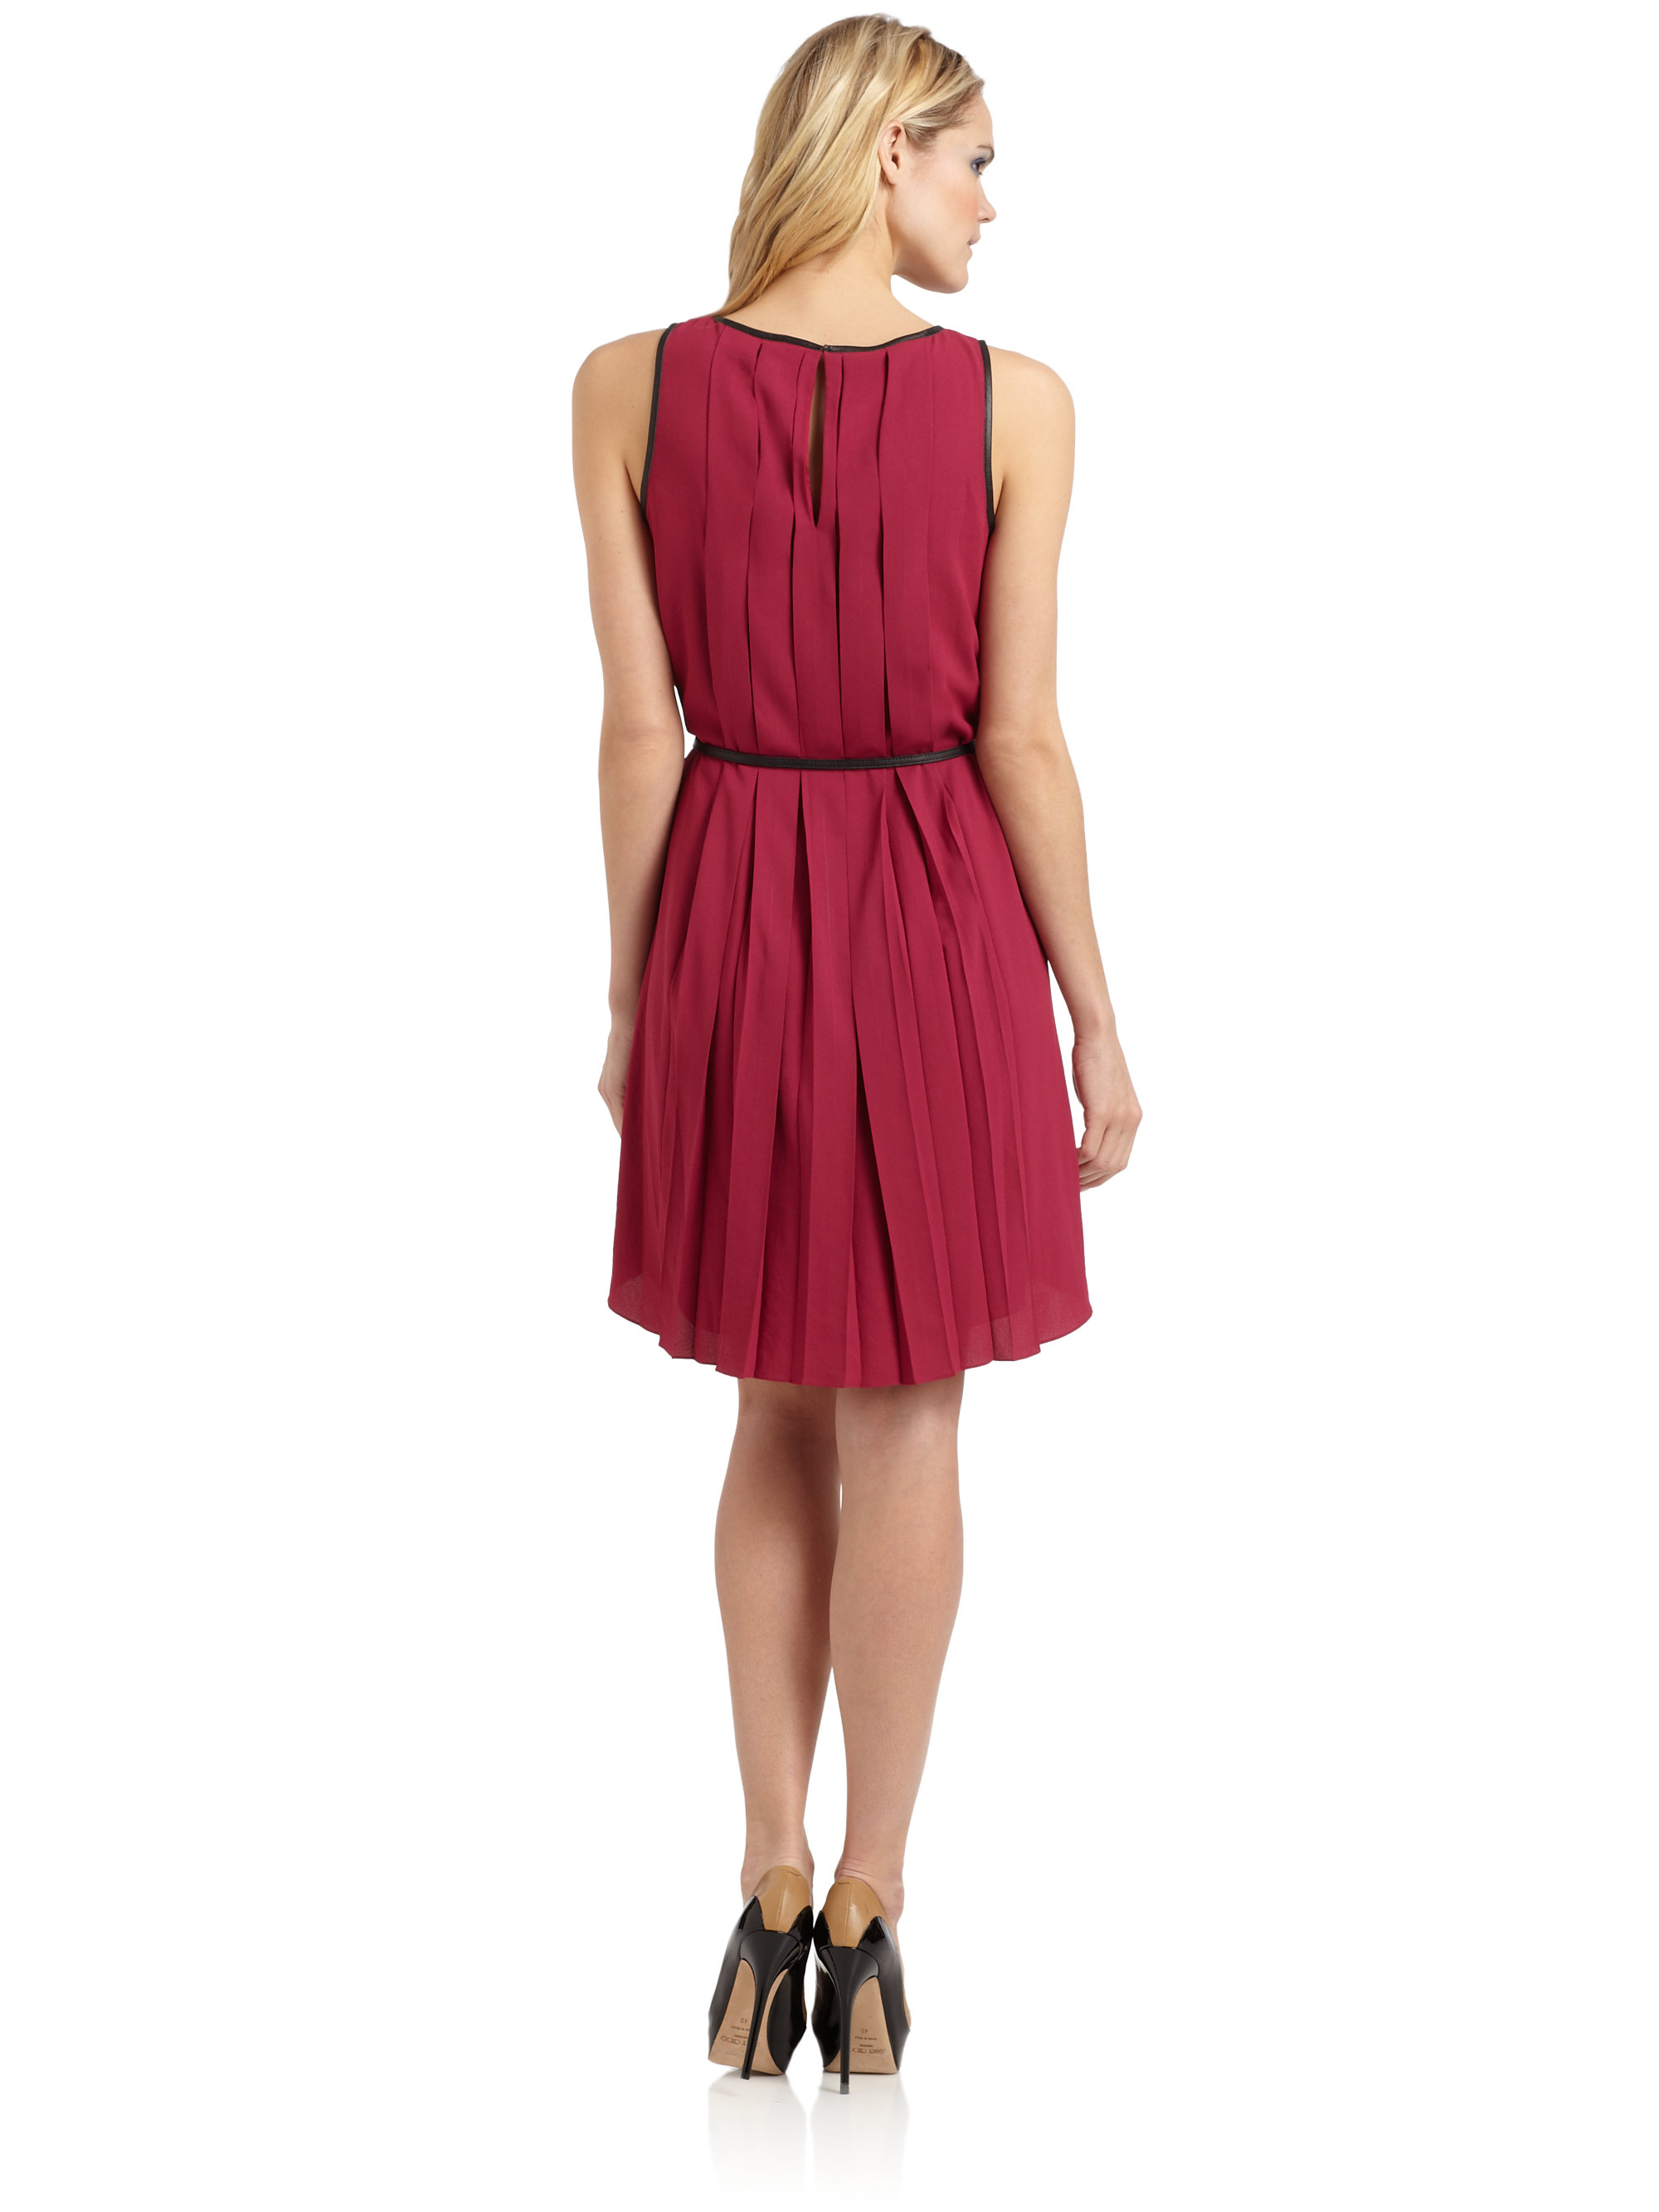 Lyst - Sachin & Babi Varna Pleated Leather Trim Dress in Red